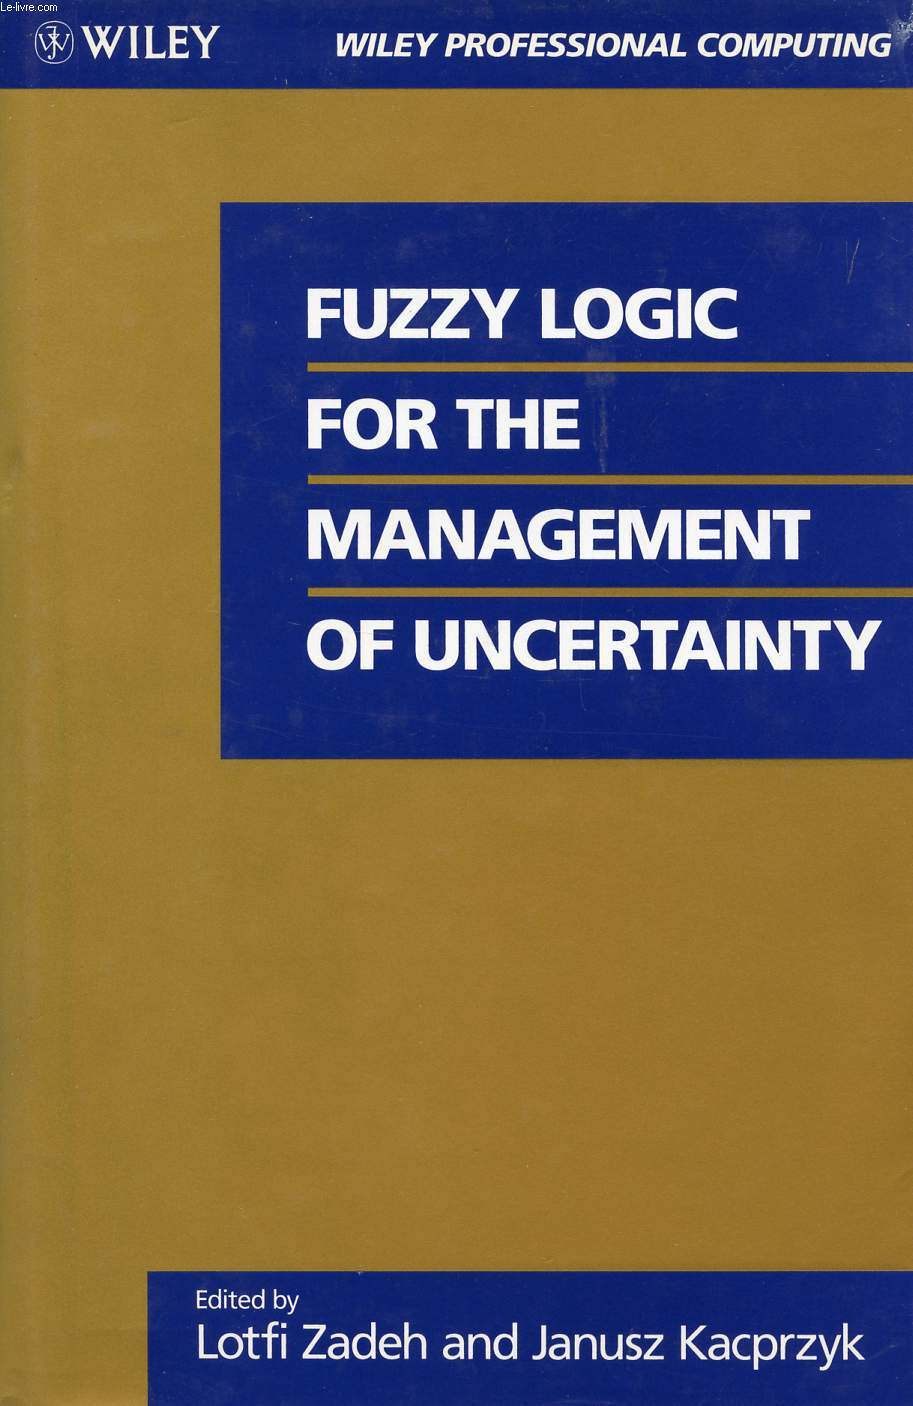 FUZZY LOGIC FOR THE MANAGEMENT OF UNCERTAINTY